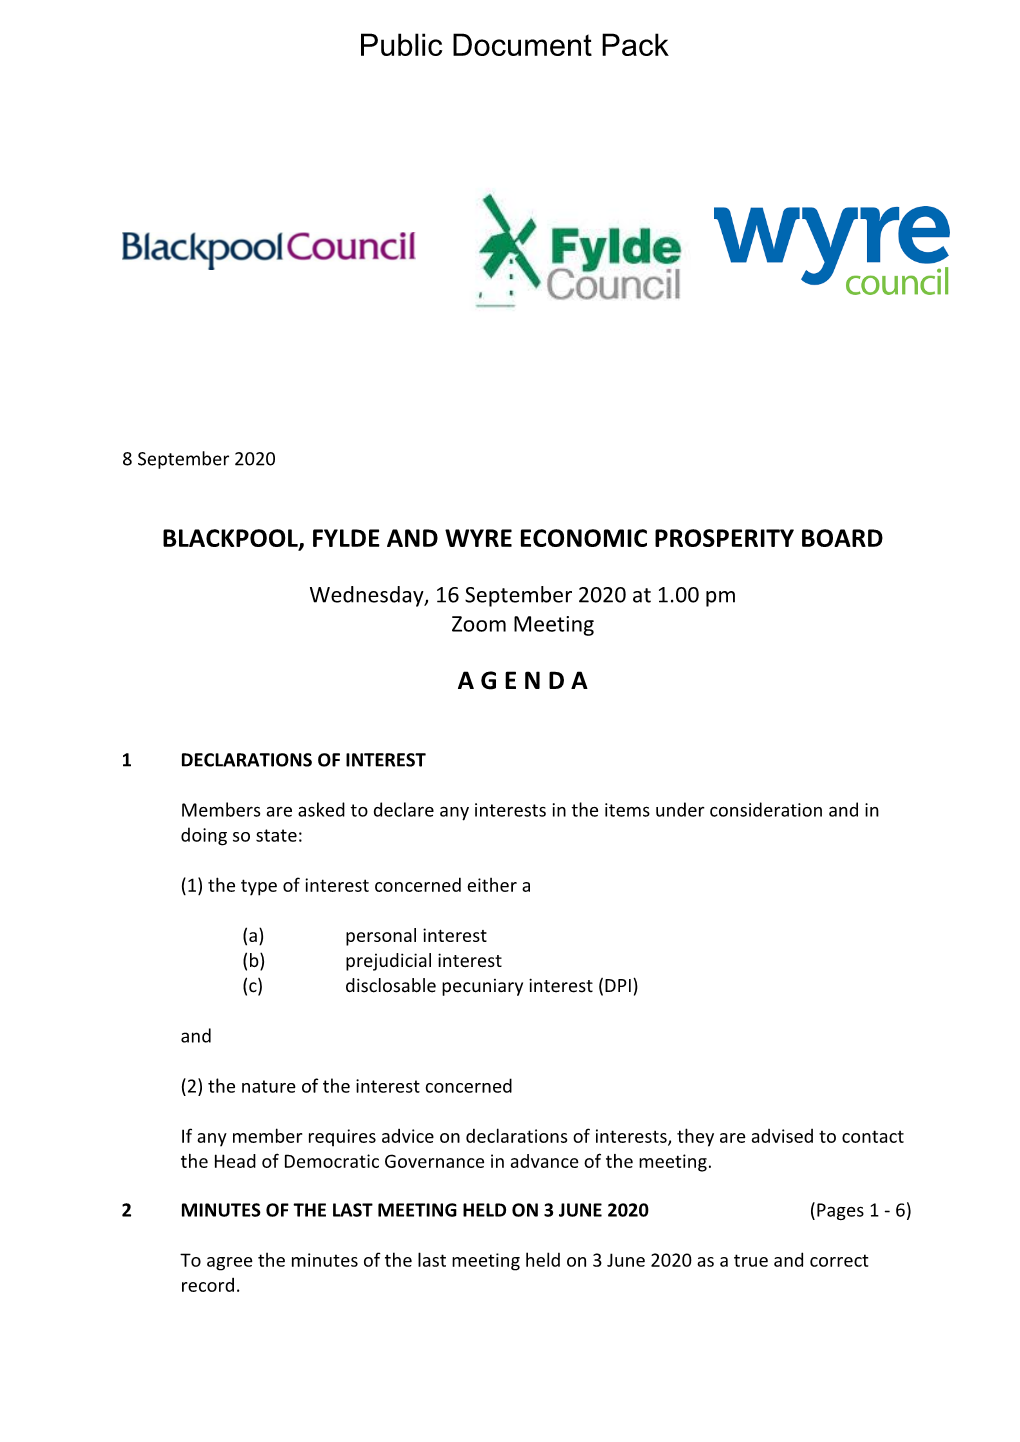 (Public Pack)Agenda Document for Blackpool, Fylde and Wyre